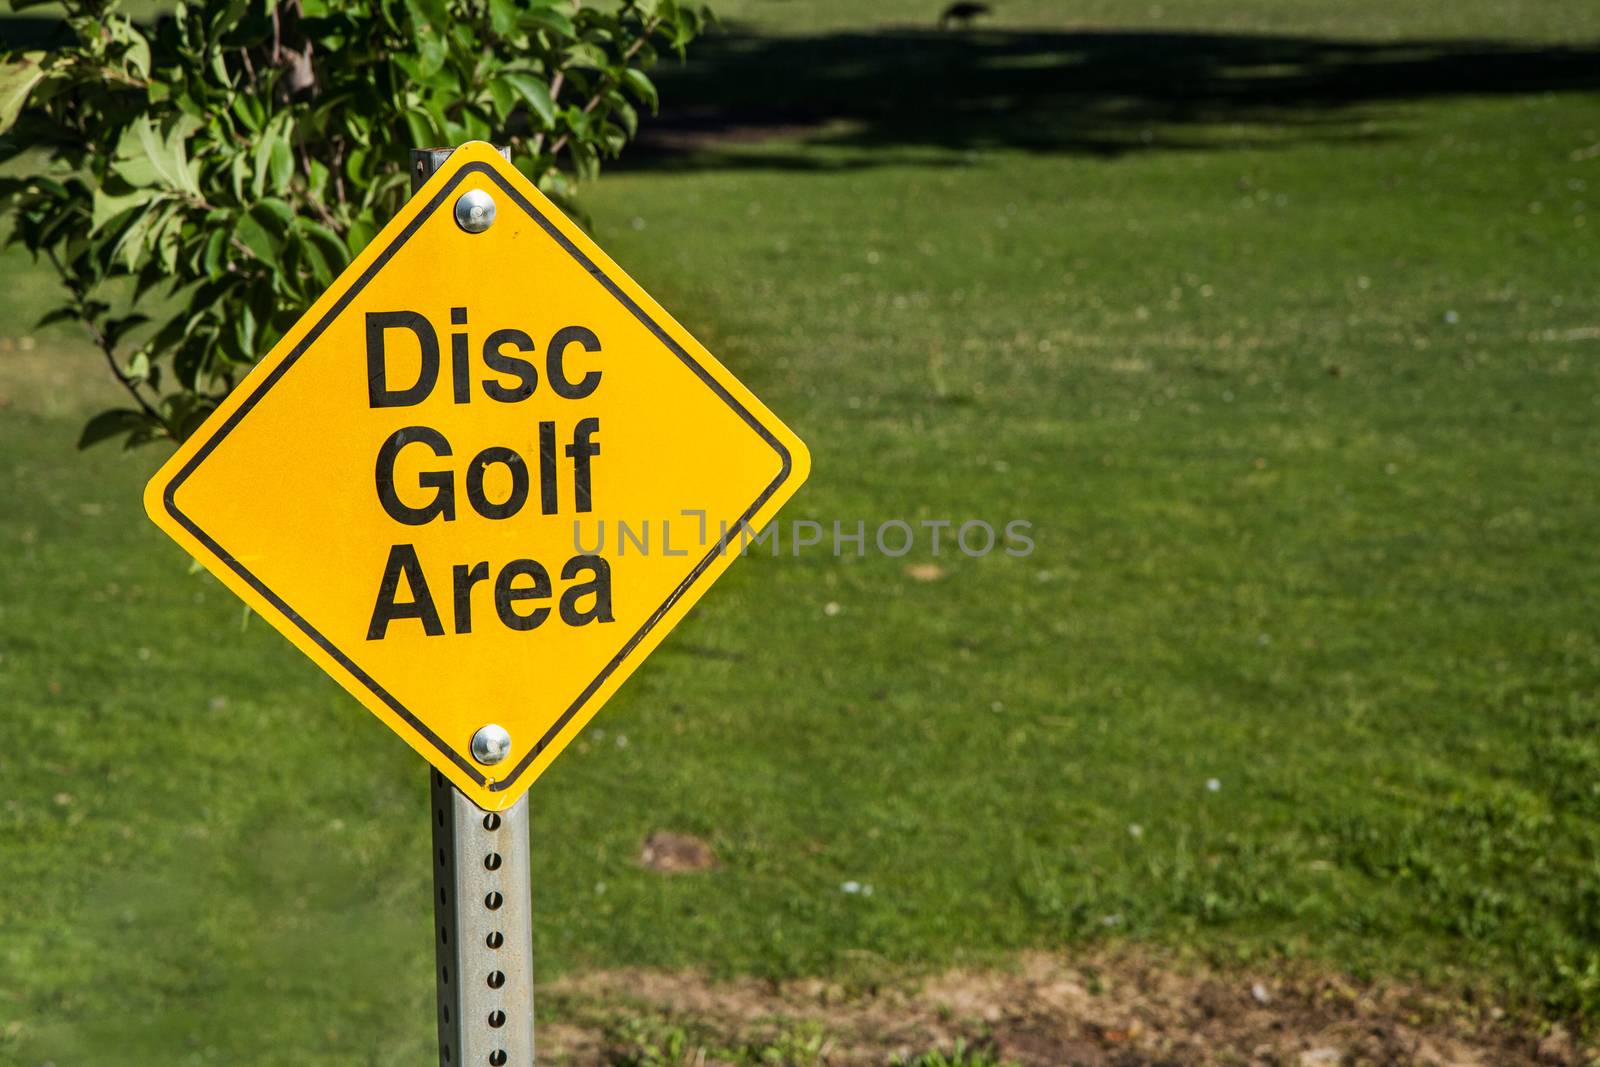 Sign showing that this is a disc golf area